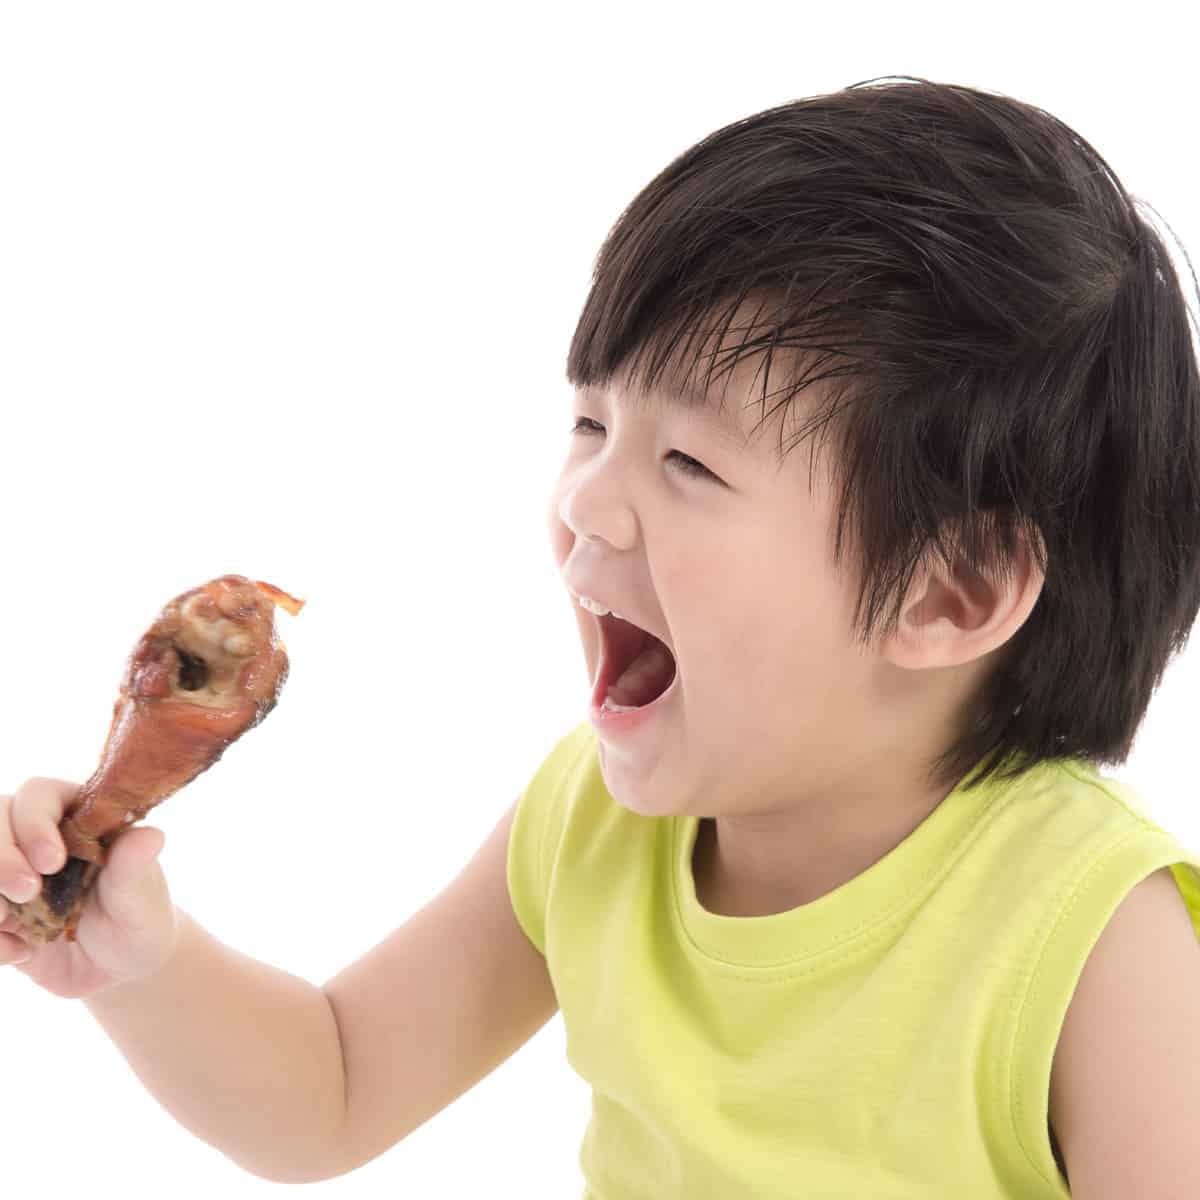 How to Get Your Kid to Eat Meat